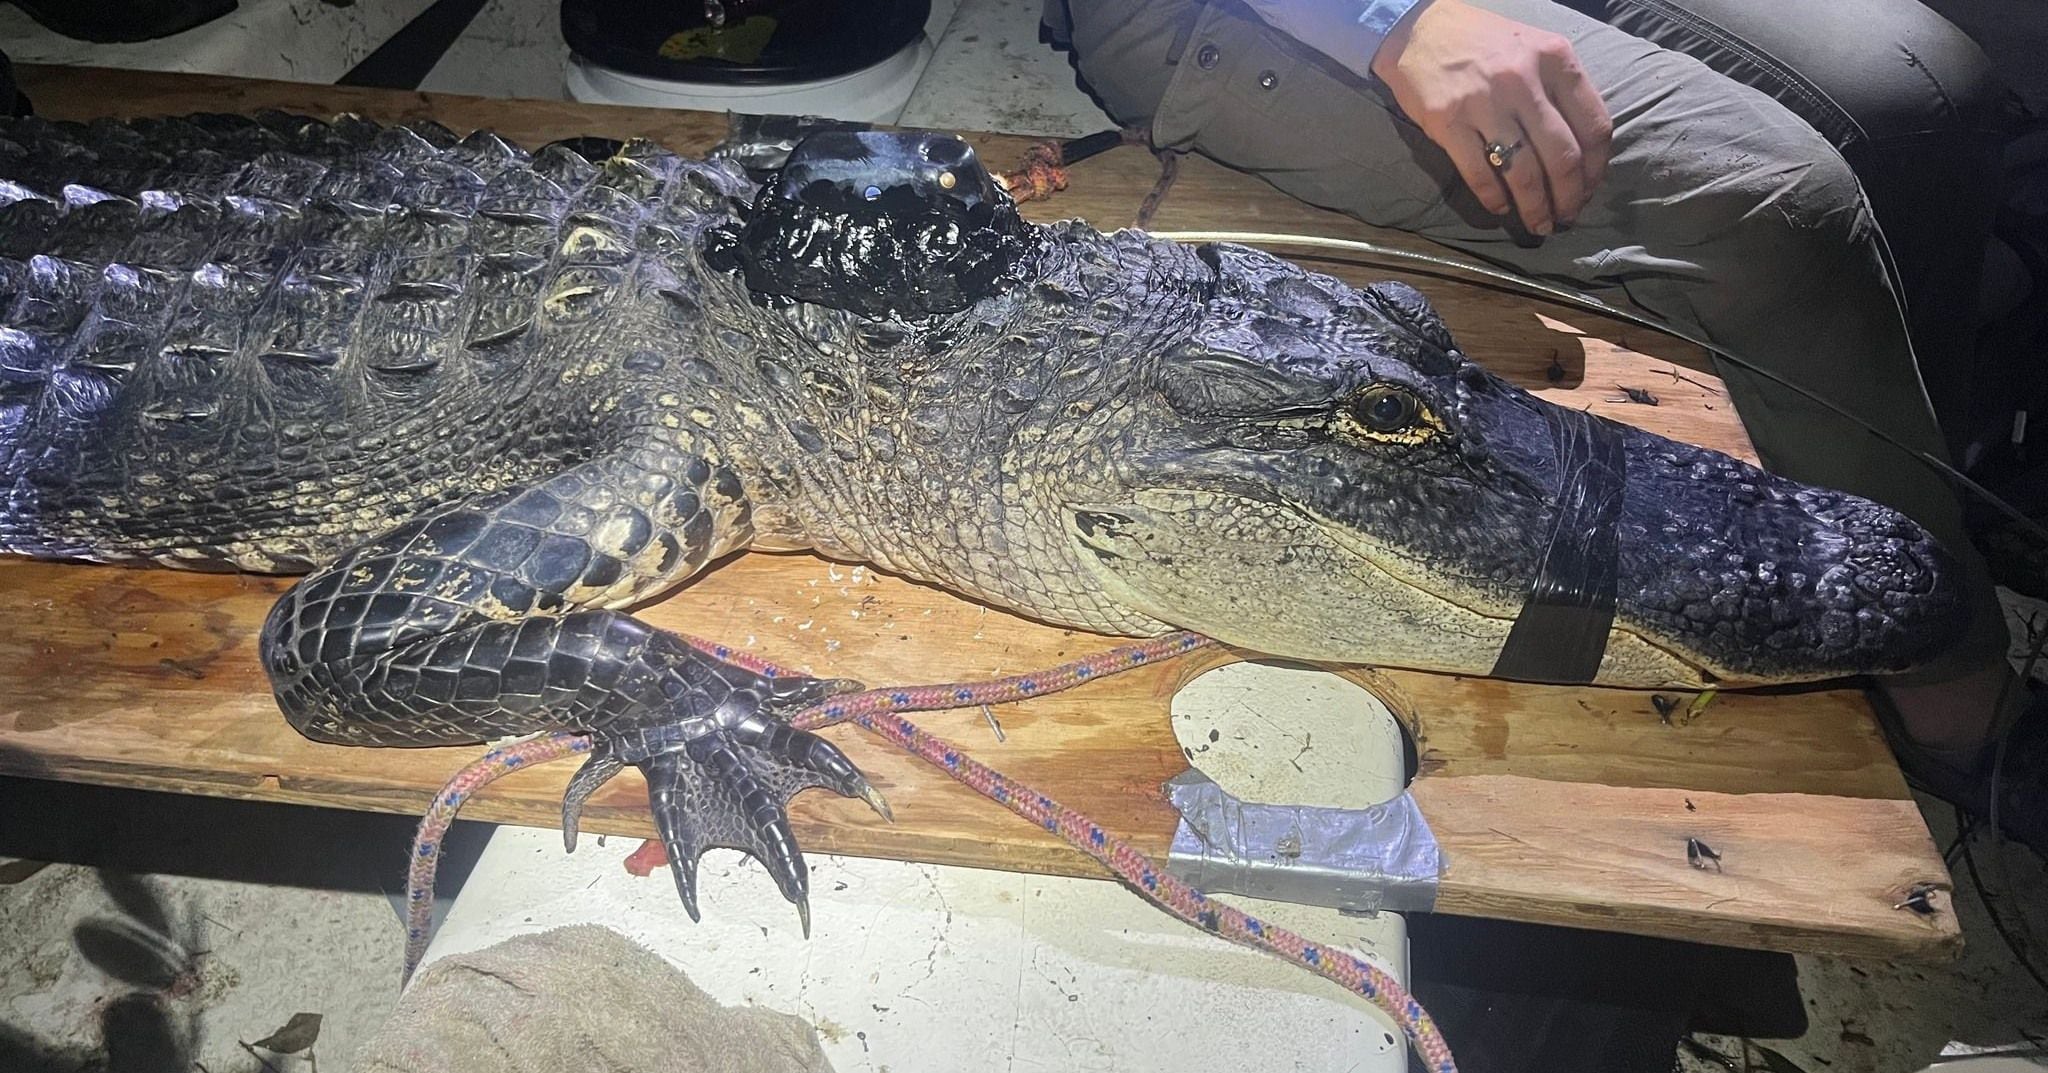 Alligator Mating Porn - 8-foot gator in Georgia swamp 'chased' out of territory by a bigger threat  â€“ WSB-TV Channel 2 - Atlanta